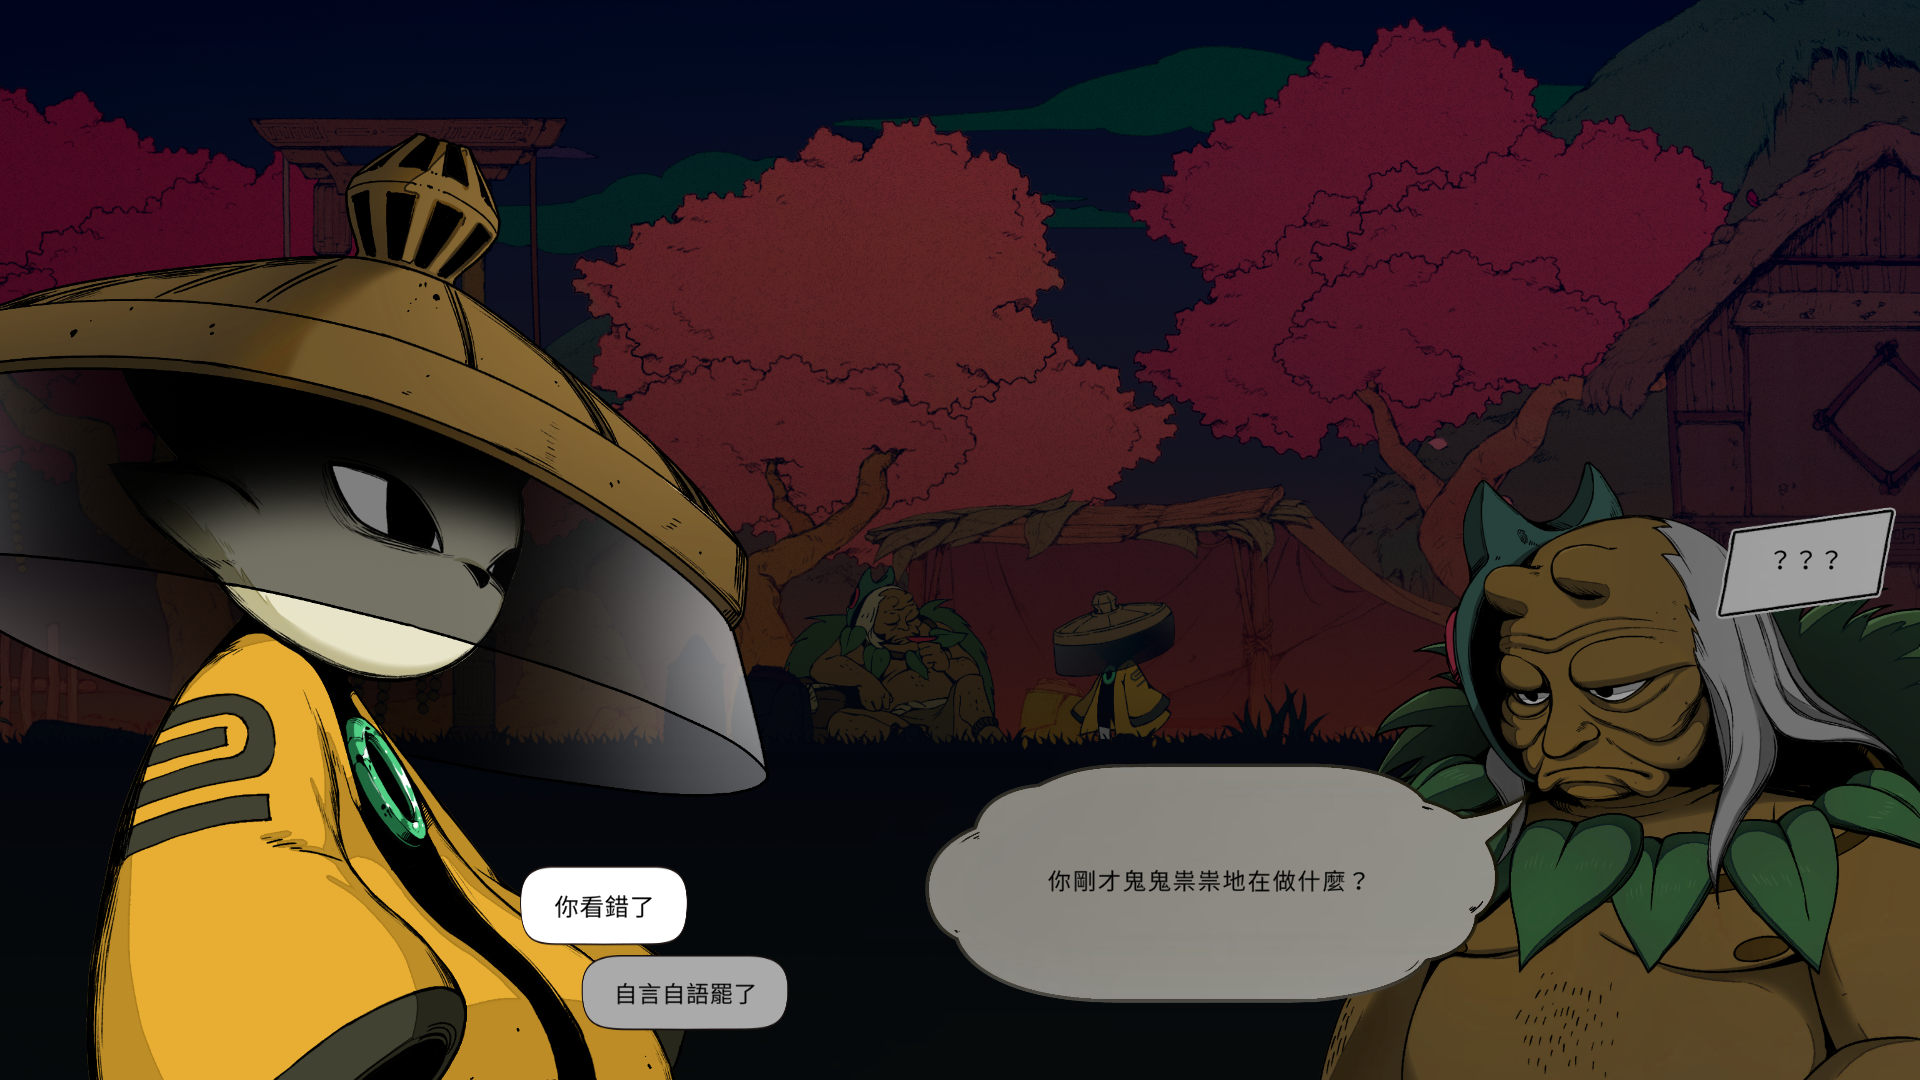 Yi in conversation with another NPC infront of a couple trees